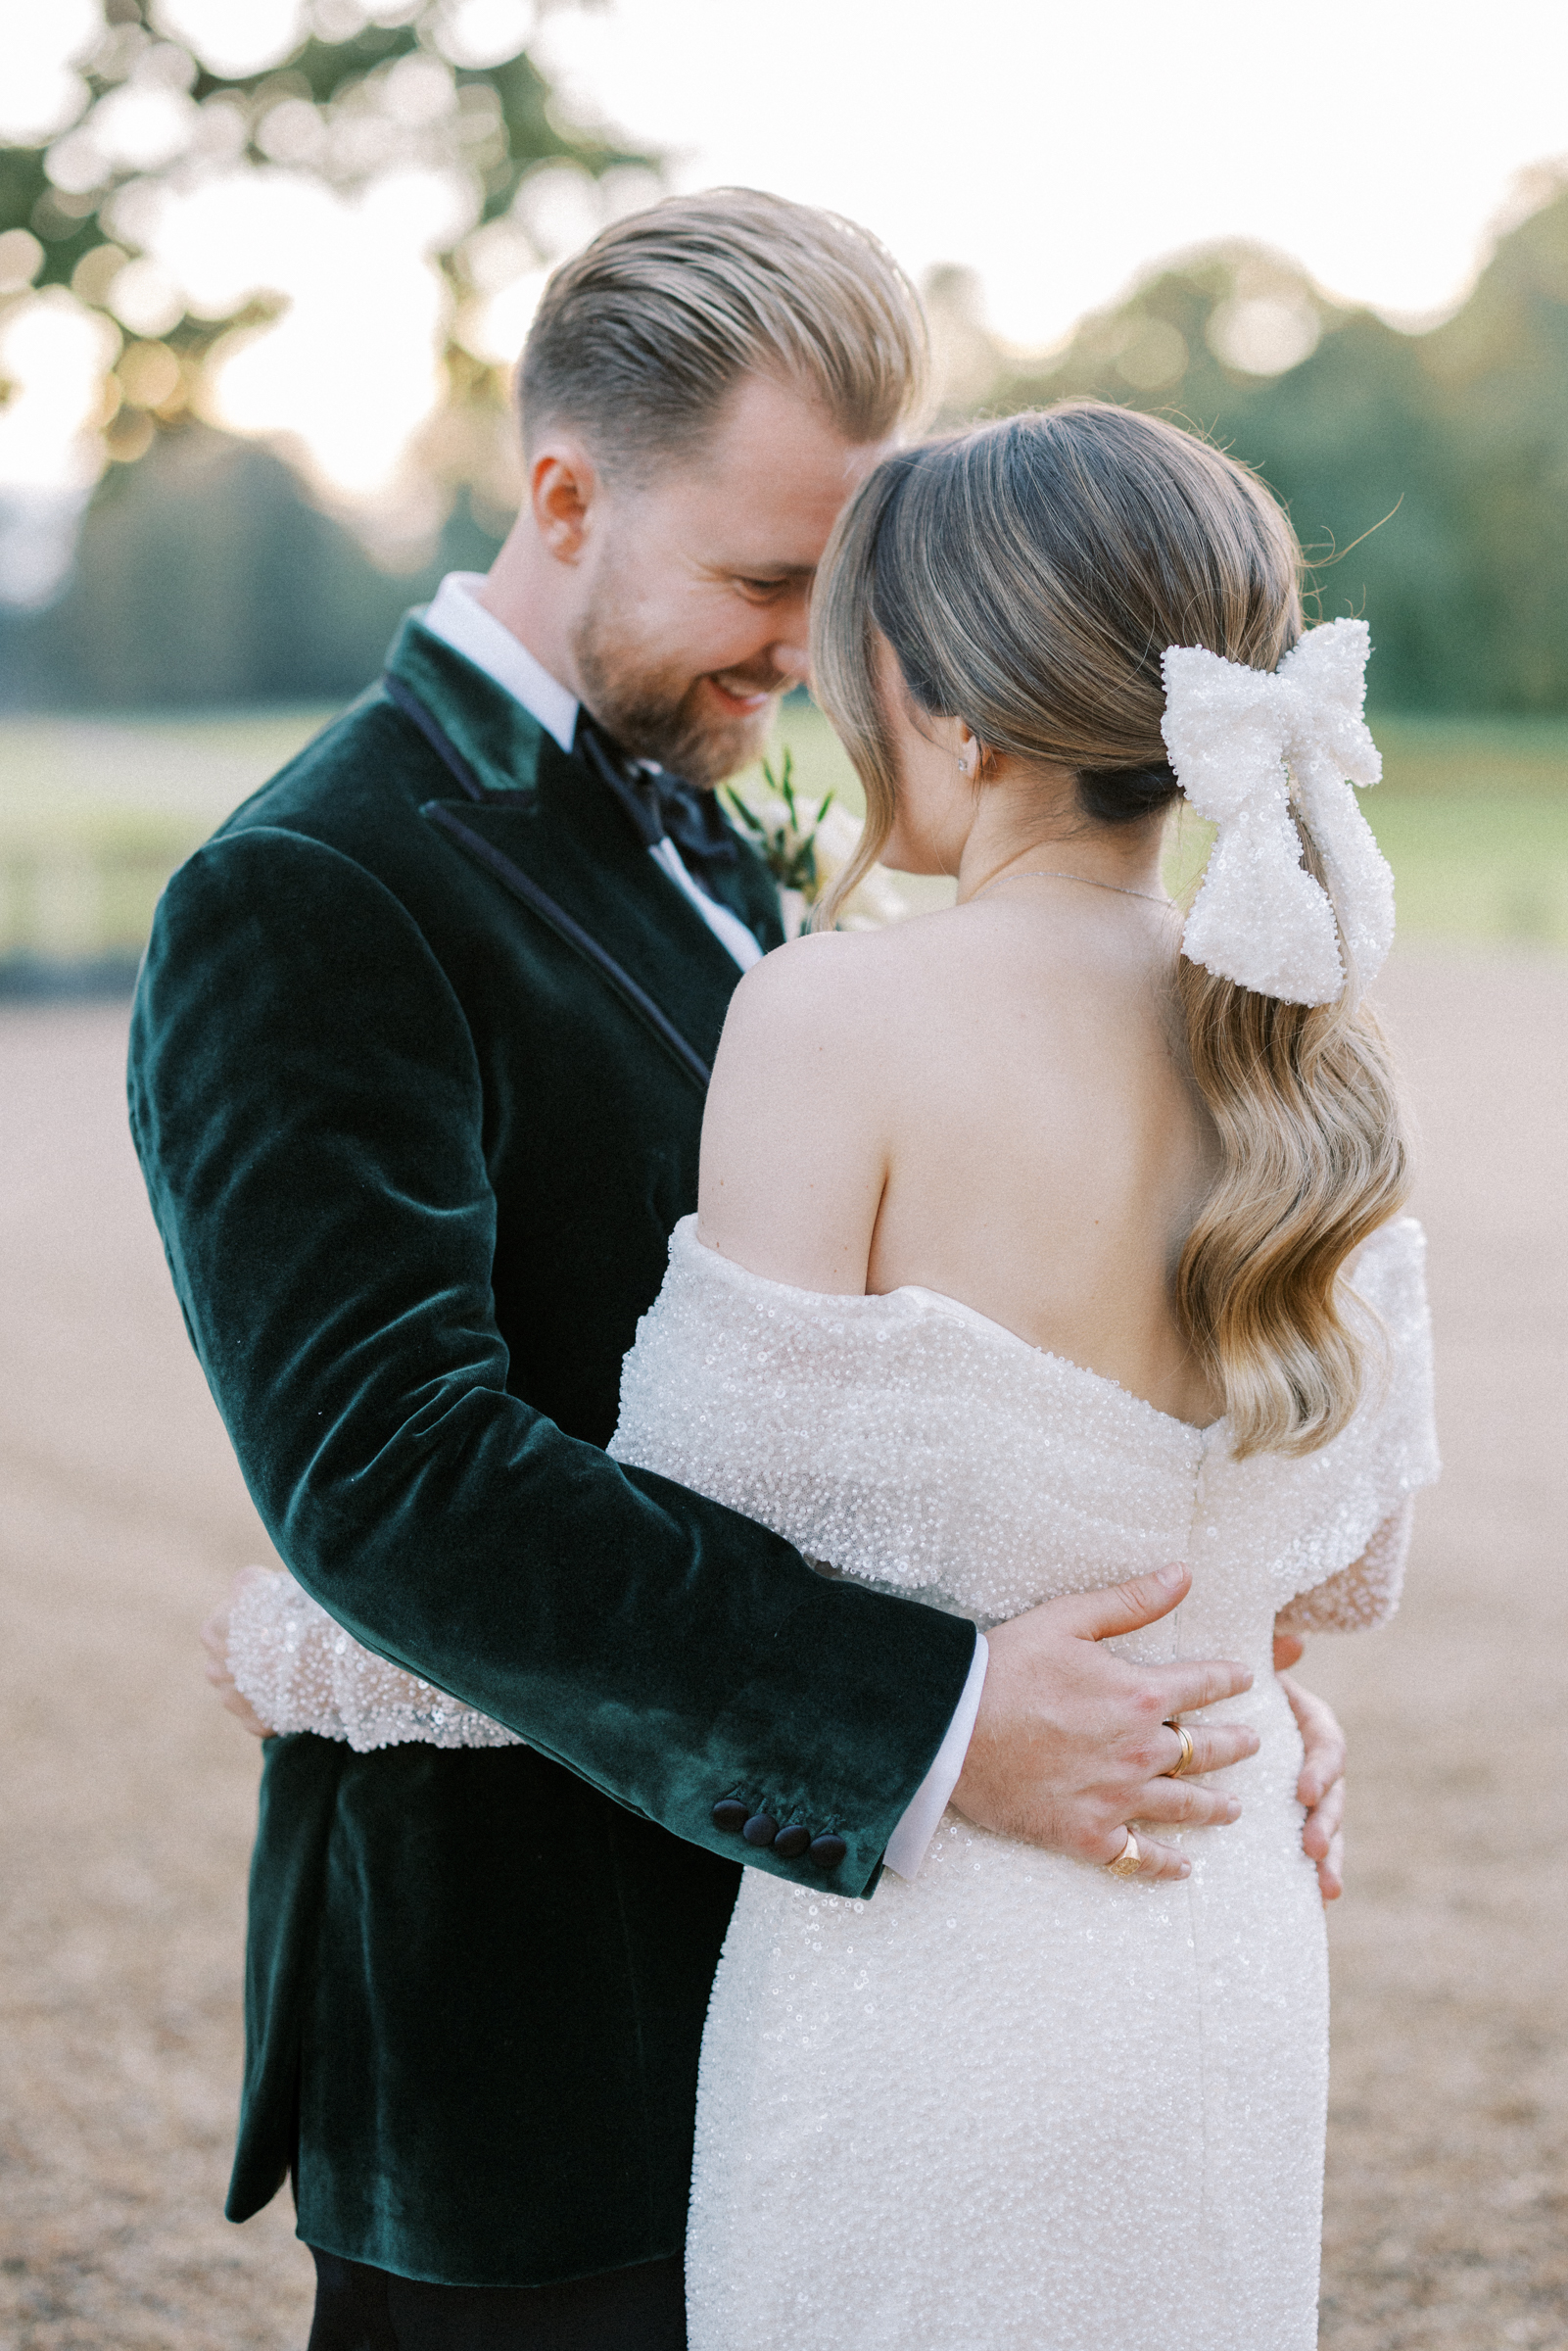 Romantic wedding photography of couple at Somerley House.